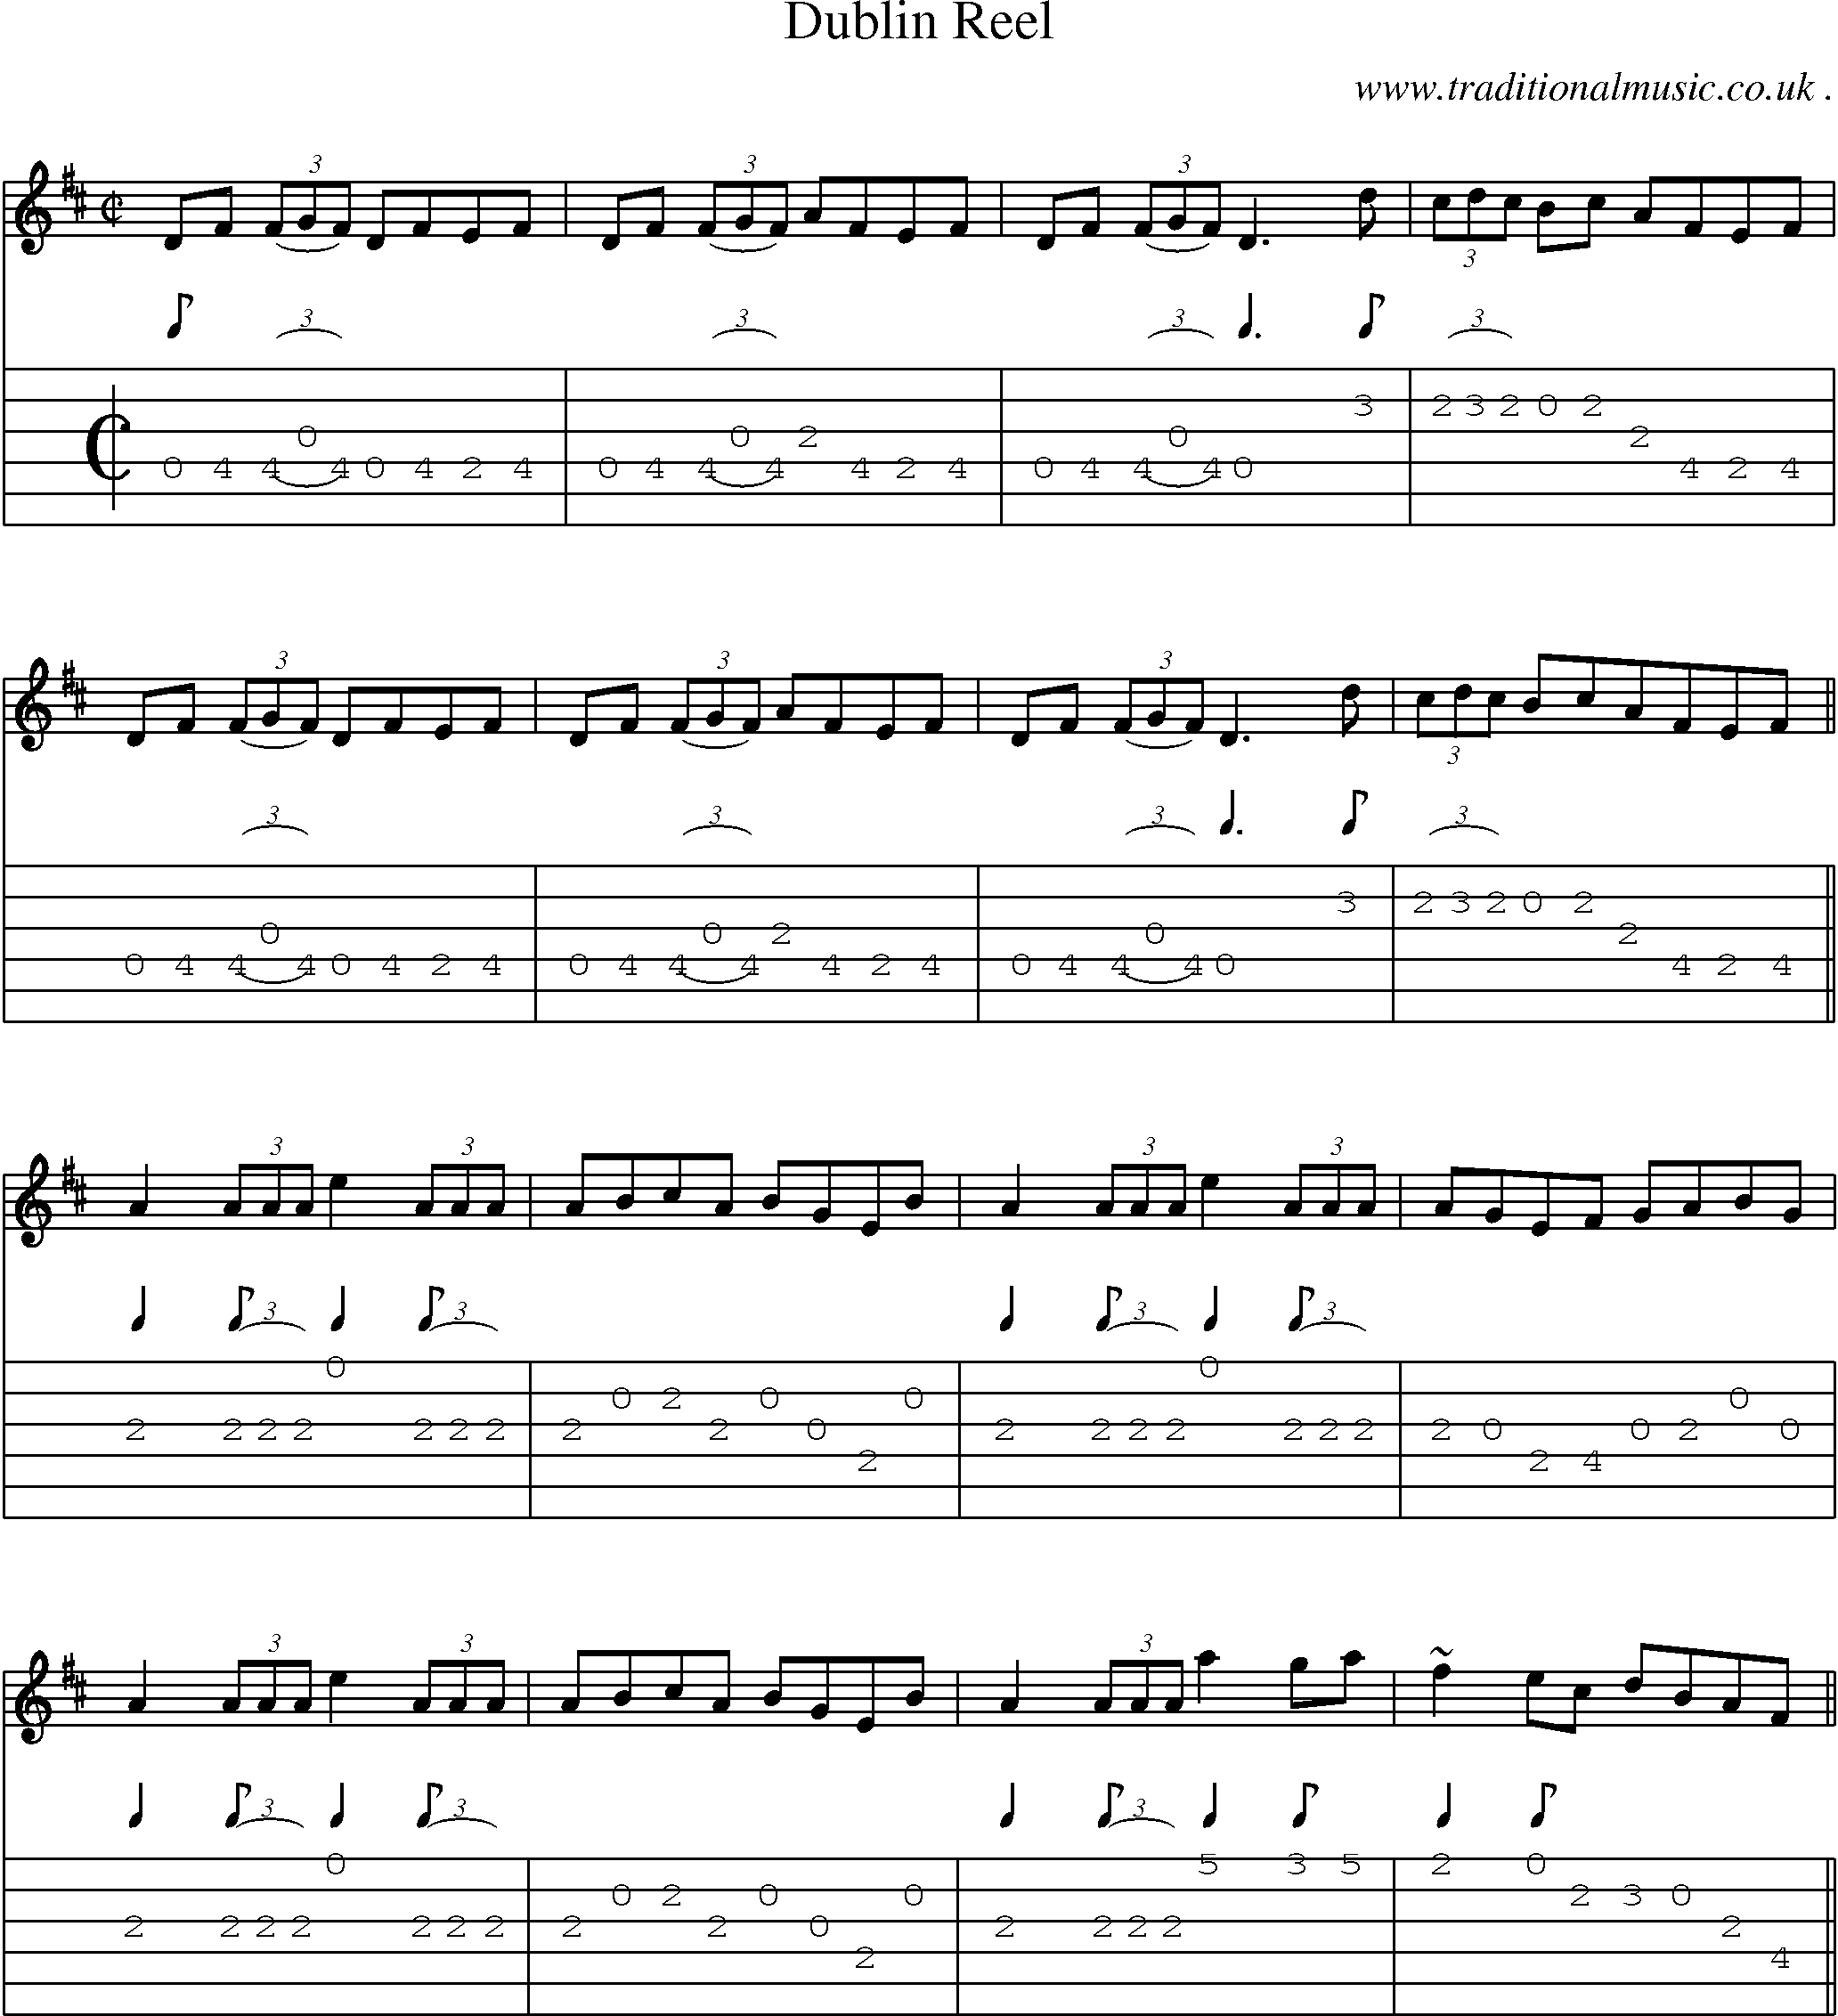 Sheet-music  score, Chords and Guitar Tabs for Dublin Reel